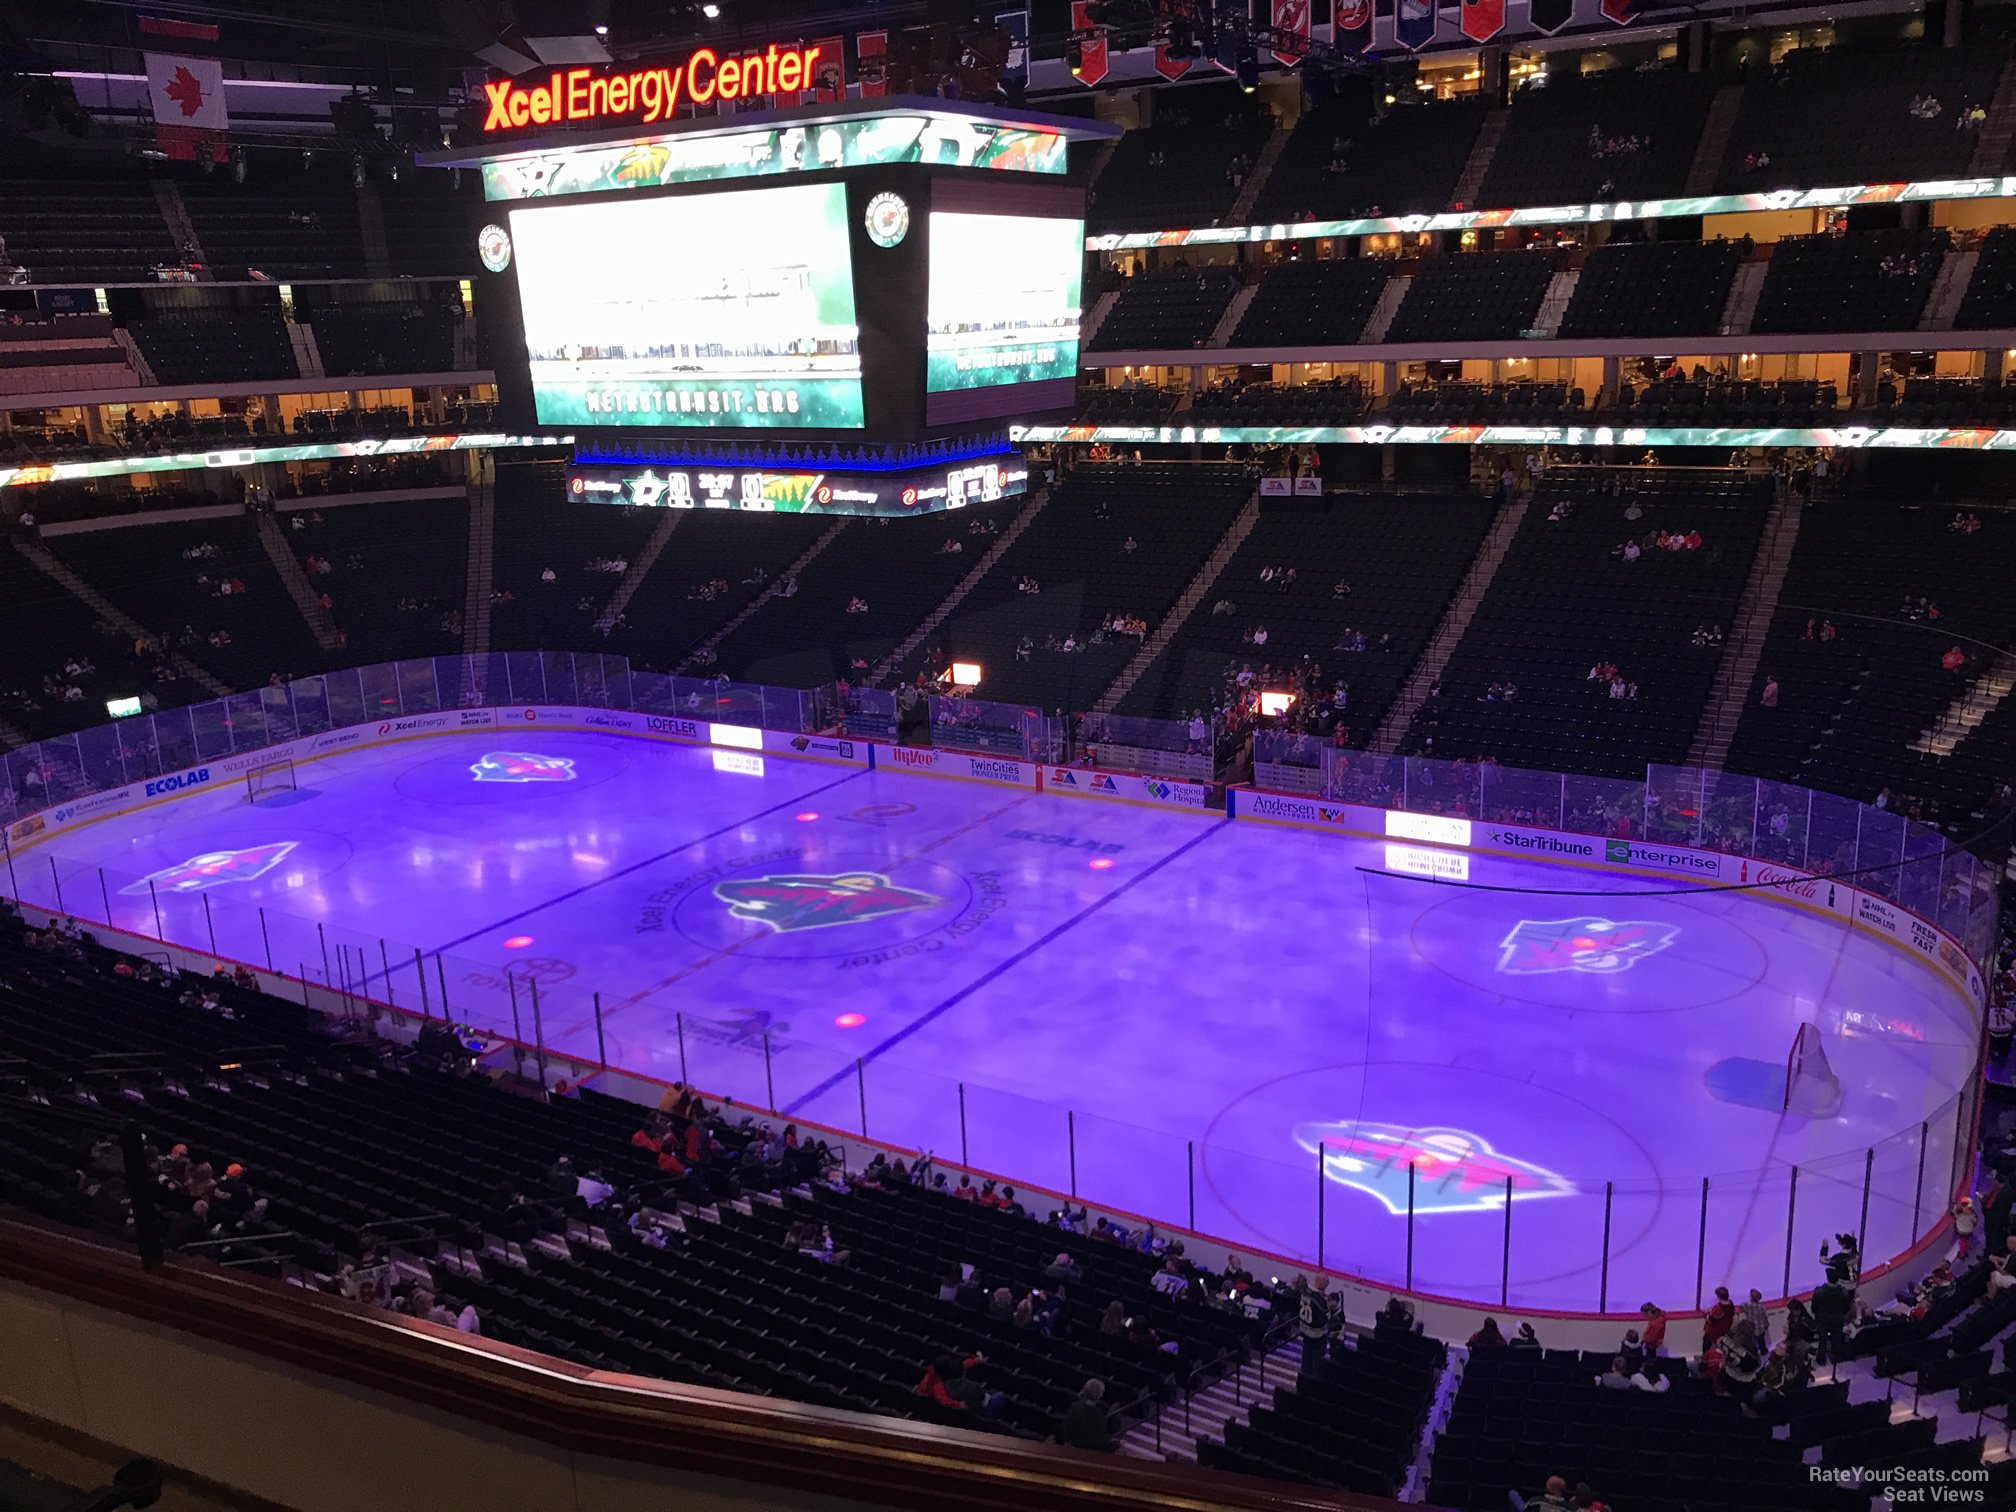 section c2, row 5 seat view  for hockey - xcel energy center